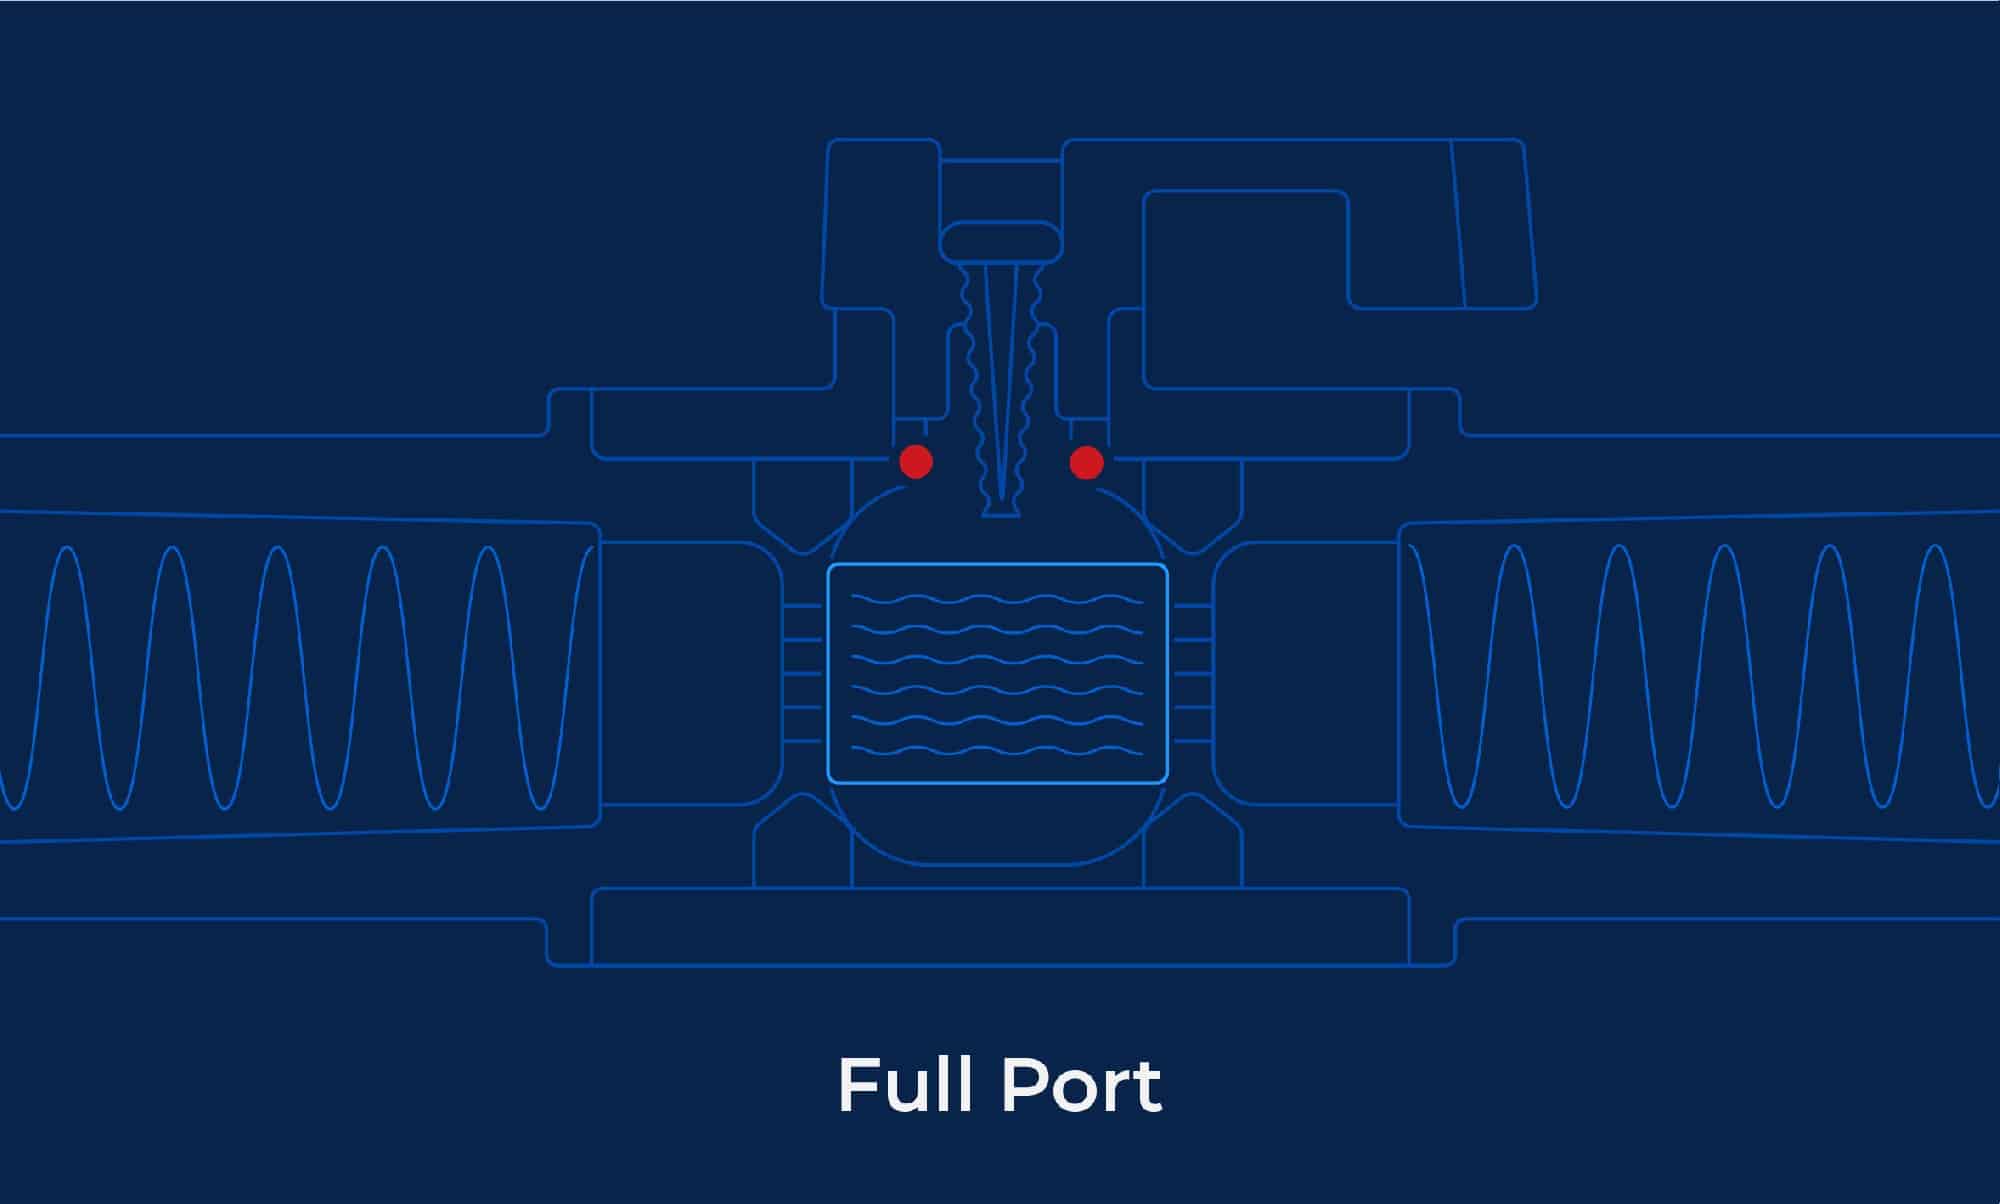 A graphic demonstrating what a Full Port looks like